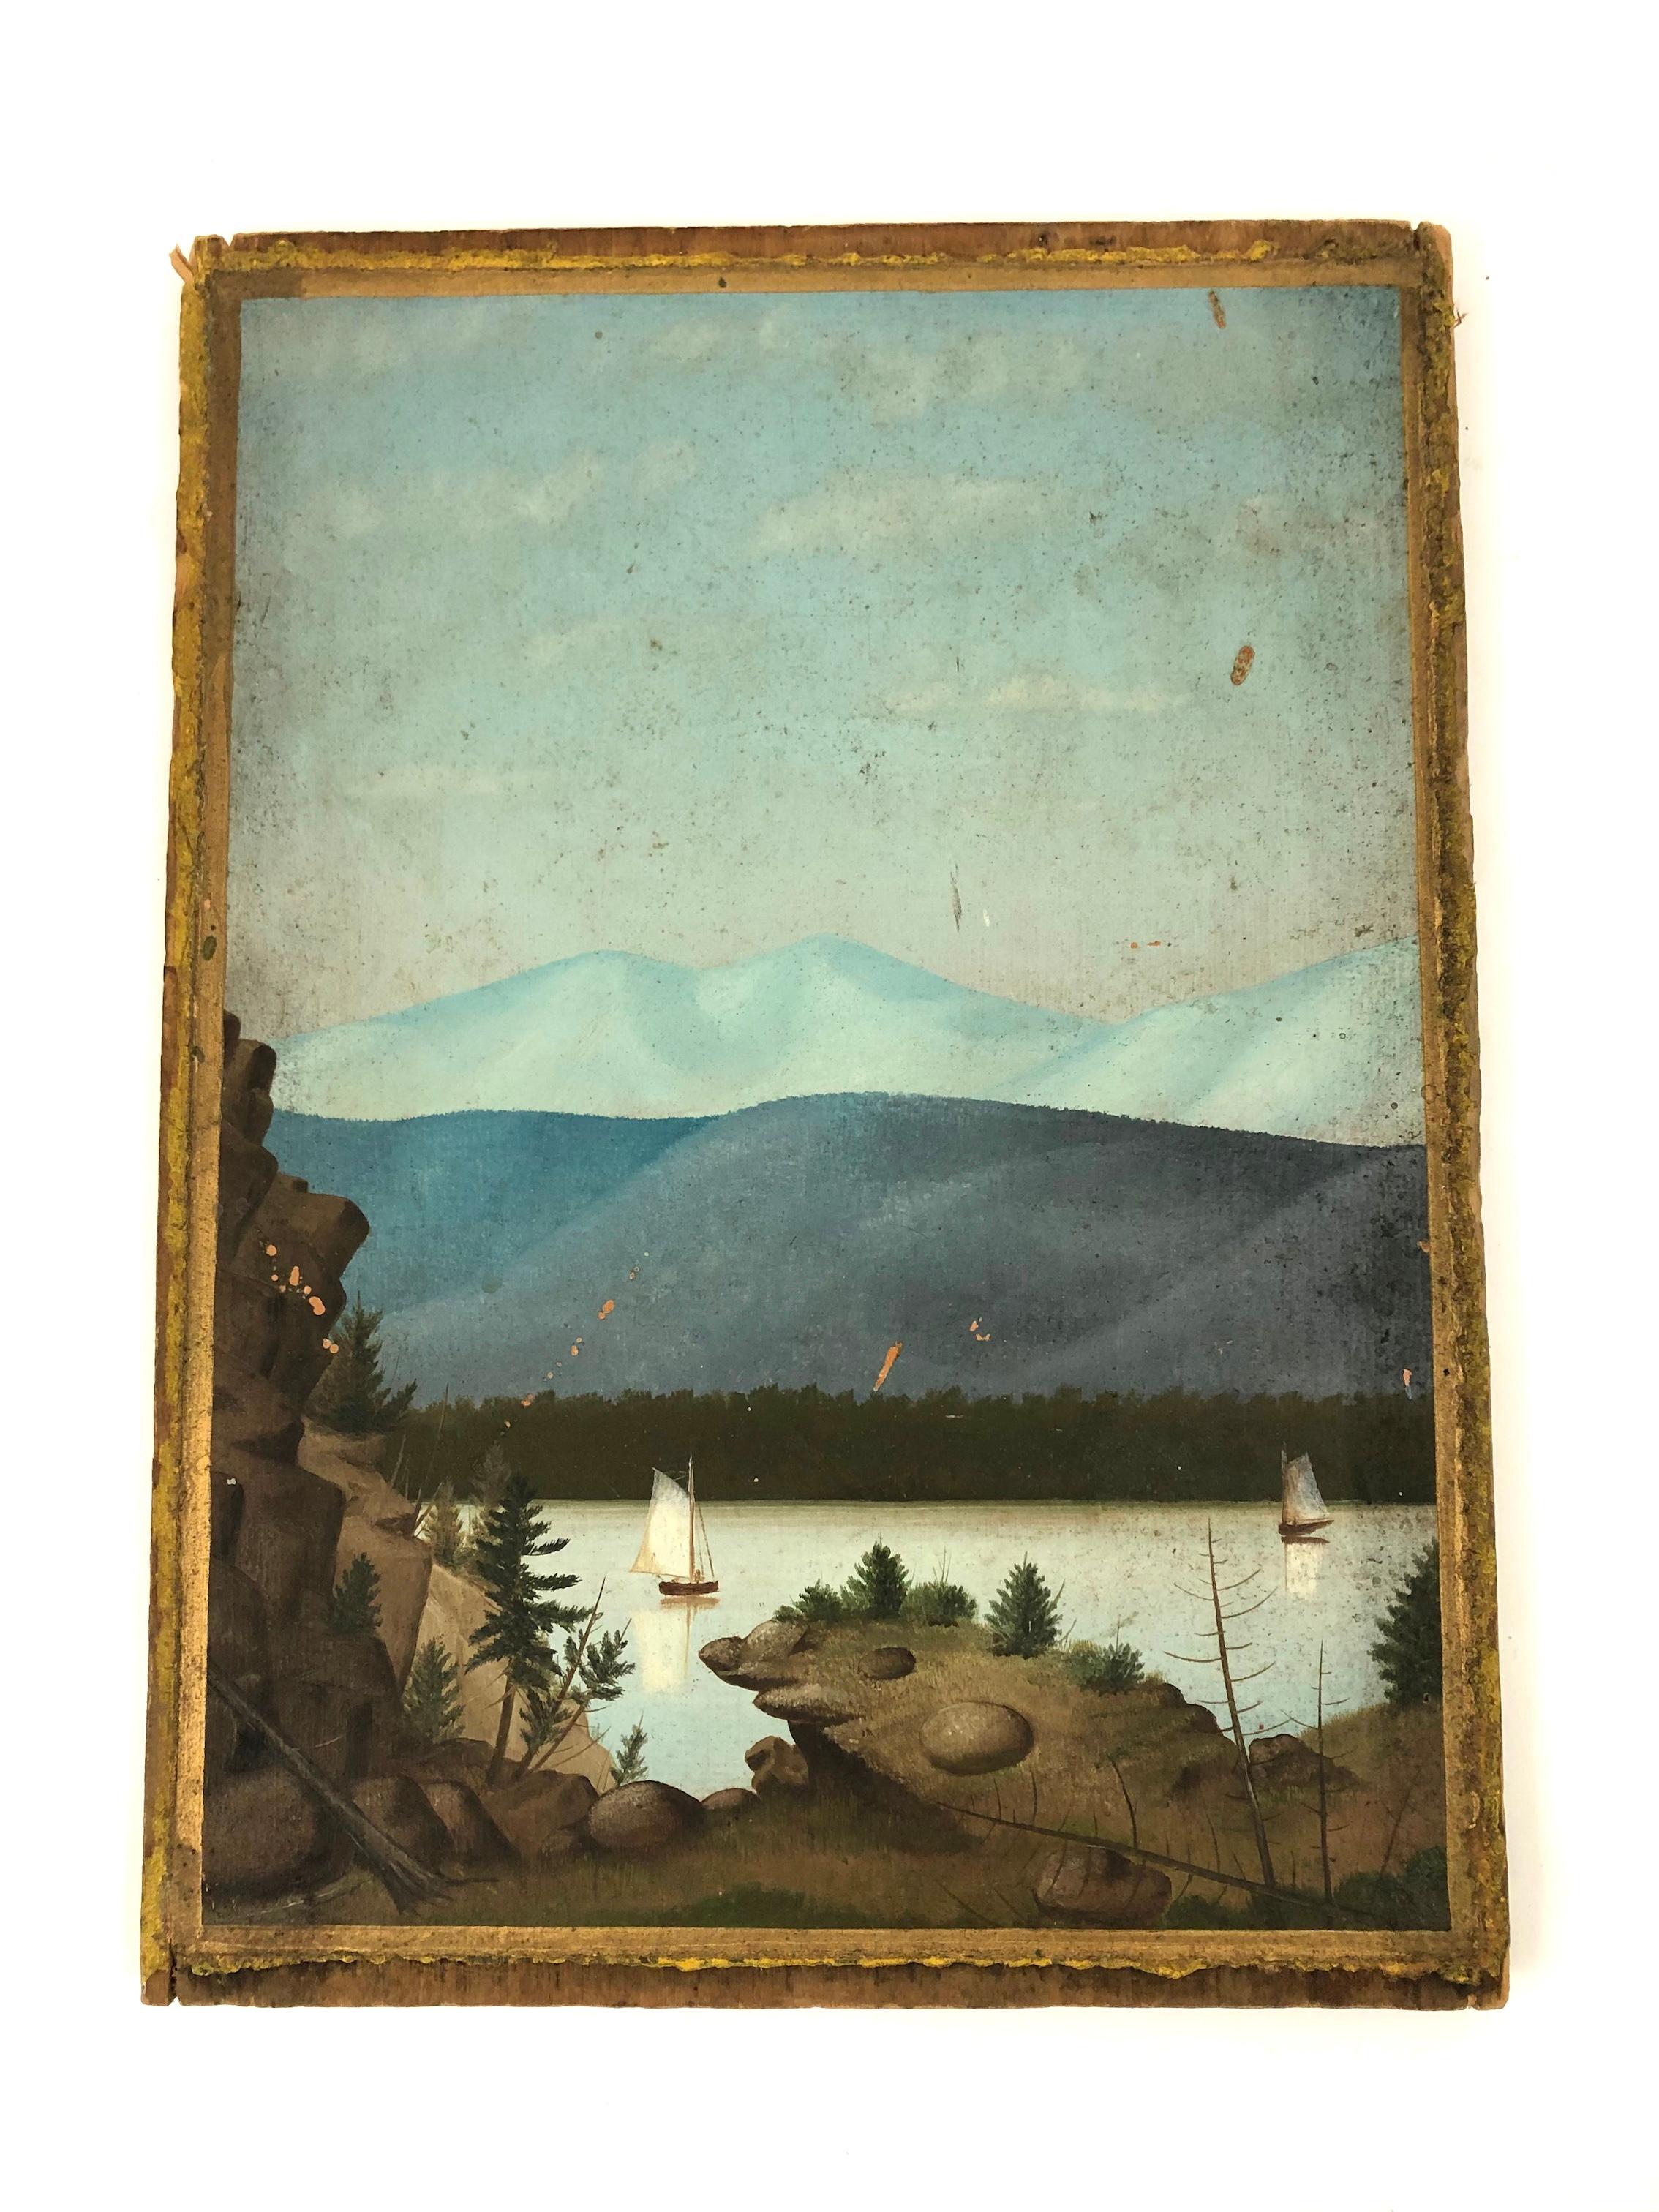 A 19th century American Folk Art double sided landscape painting on wood, depicting sailboats on a lake surrounded by mountains, in beautiful shades of blue, green and brown. The painting was found in Connecticut and, with its beveled edges and two